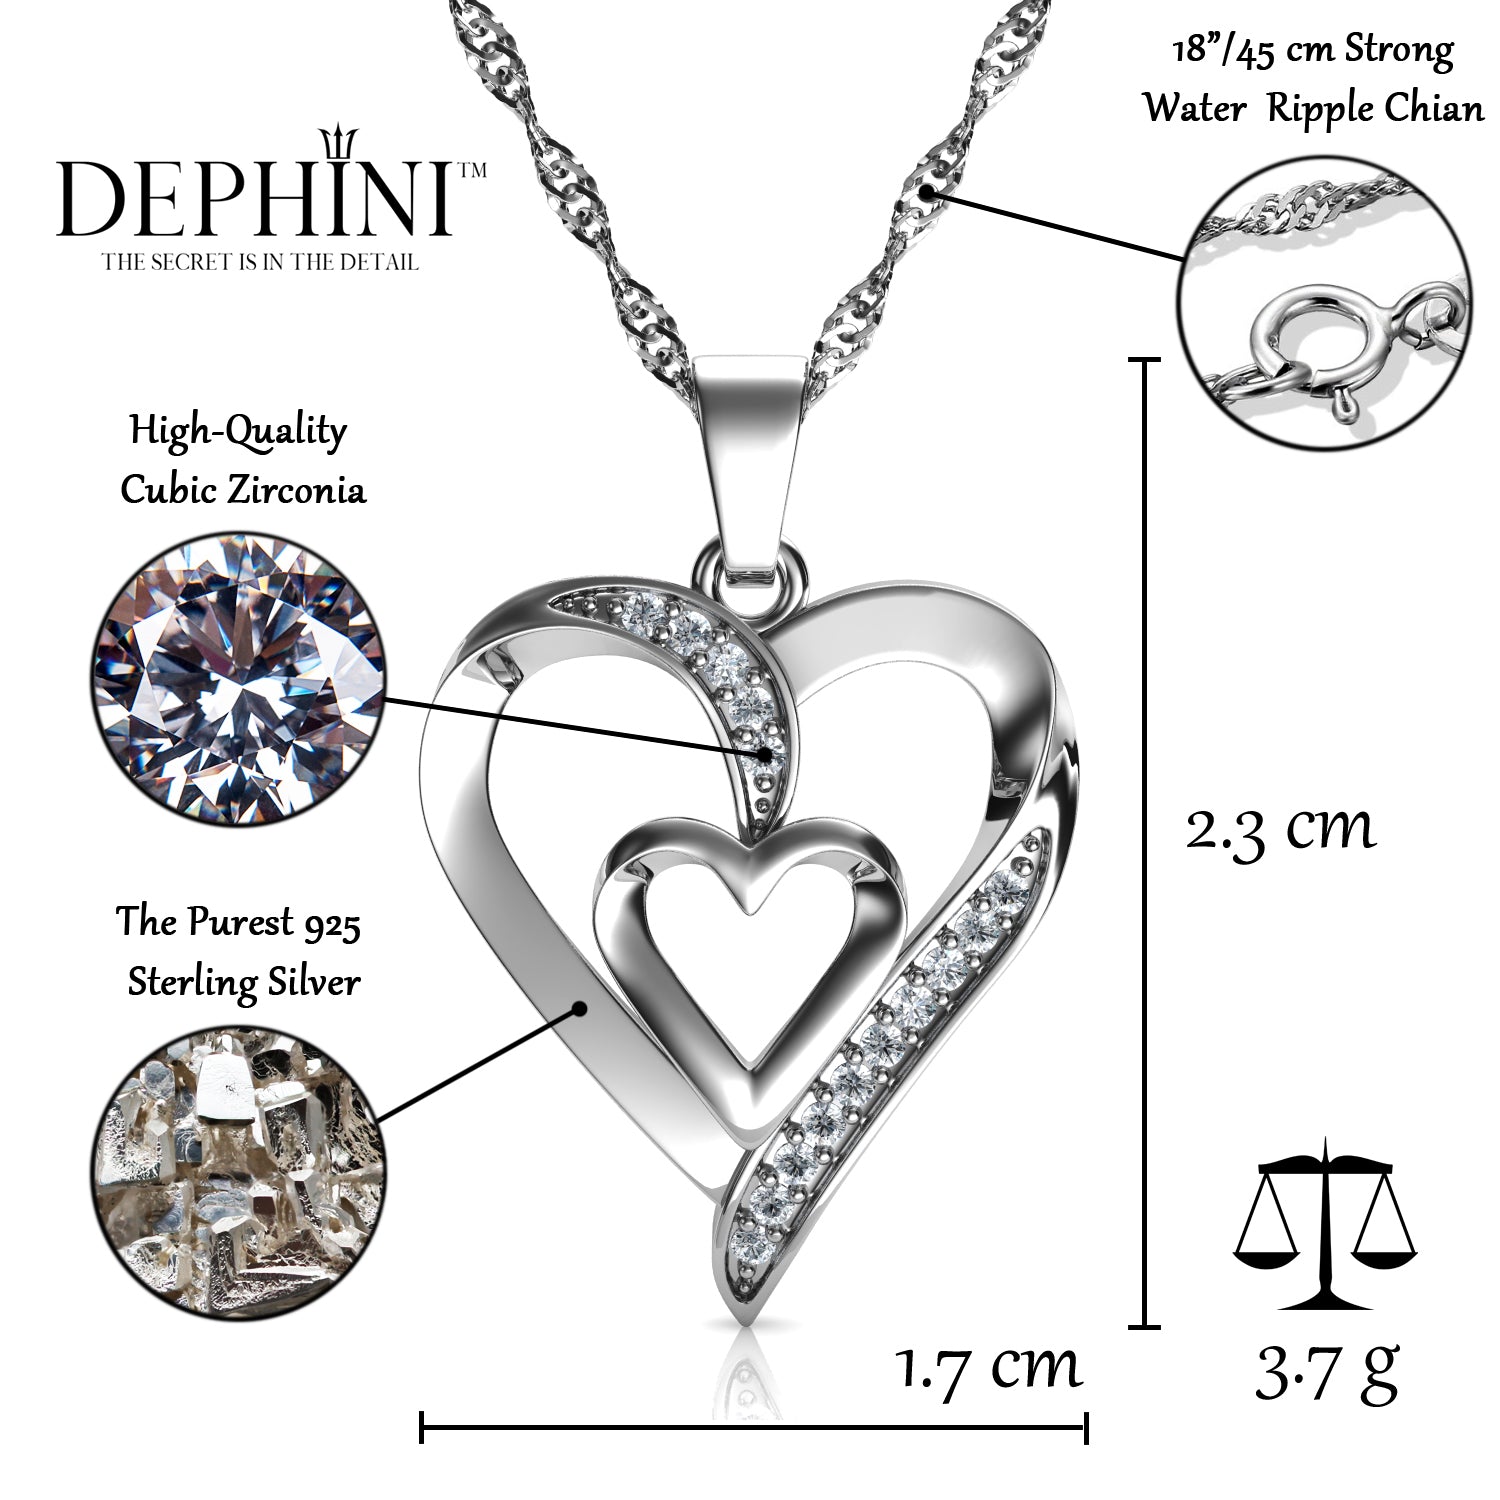 925 Sterling Silver Double Circle Pendant Heart Necklace Chain For